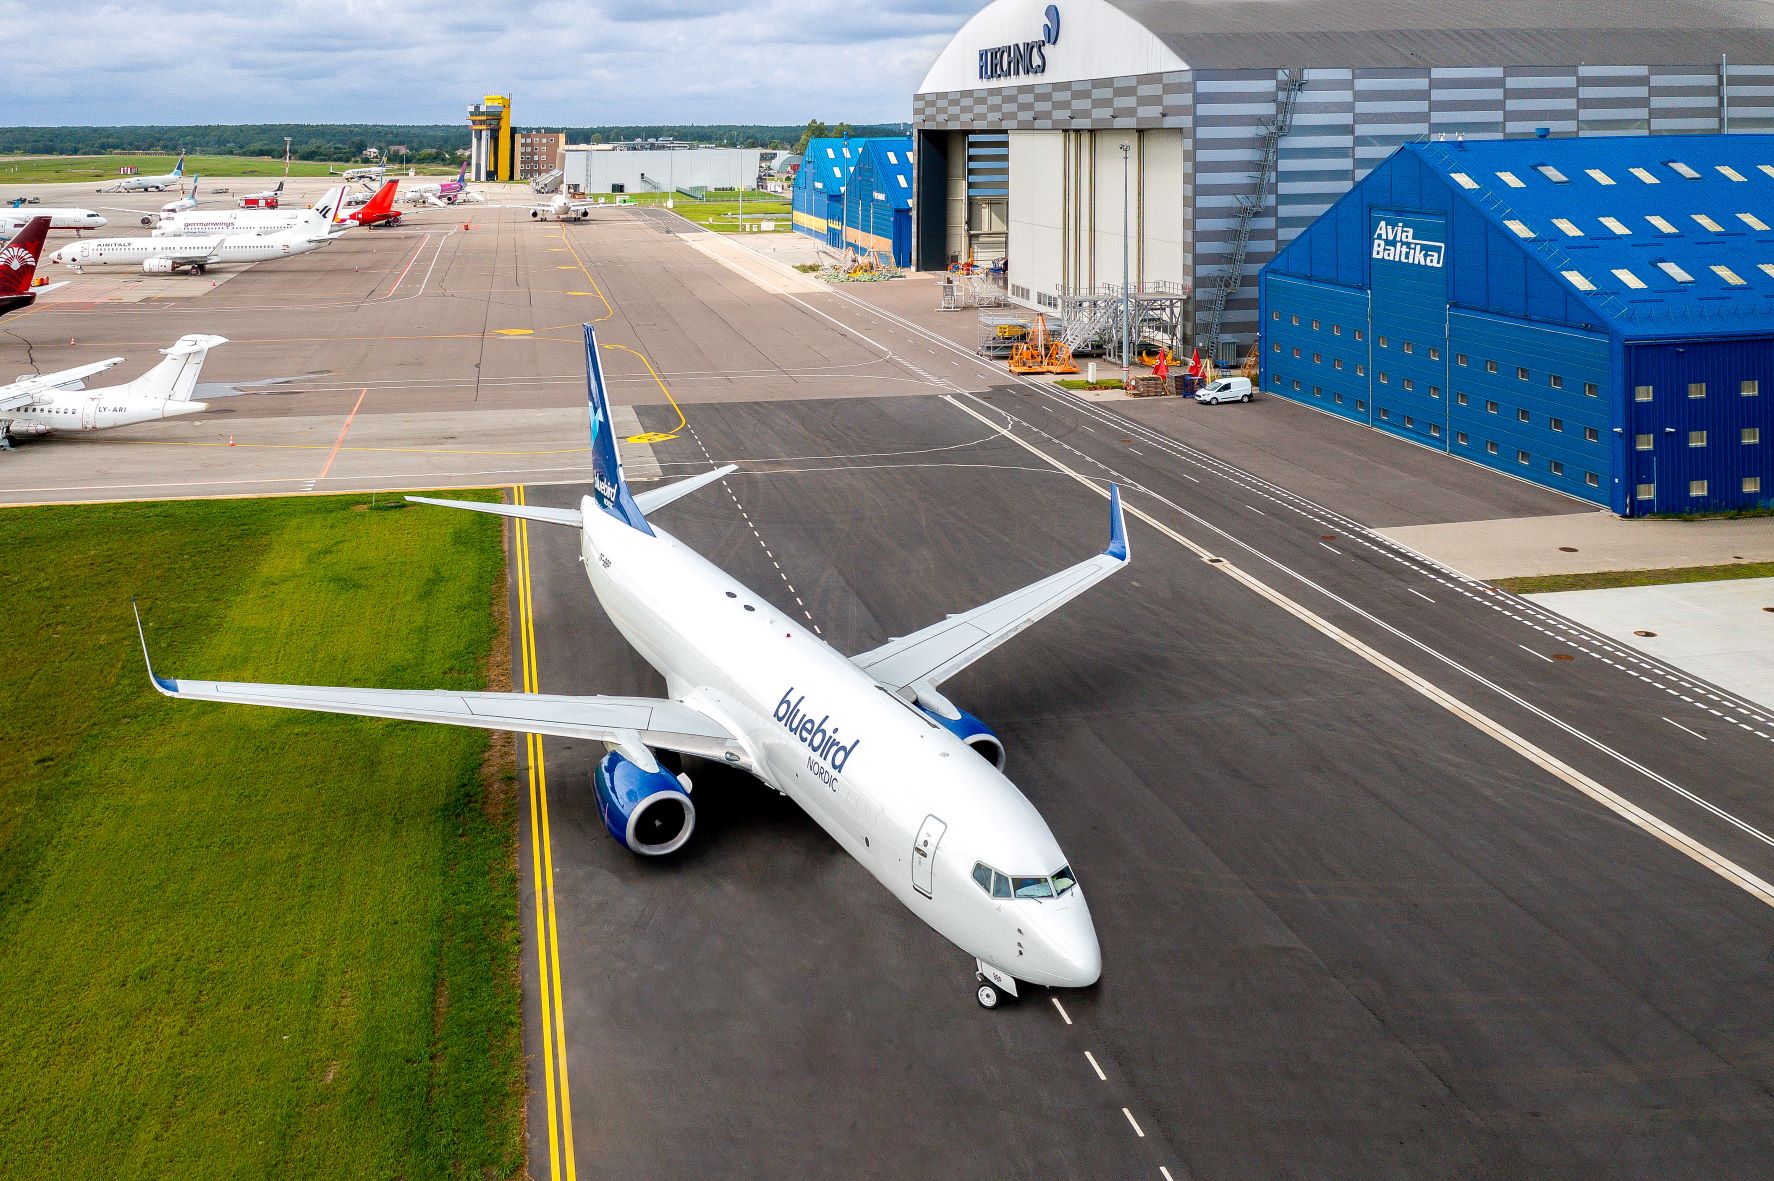 AviaAM Leasing delivers second B737-800 converted freighter to Bluebird Nordic